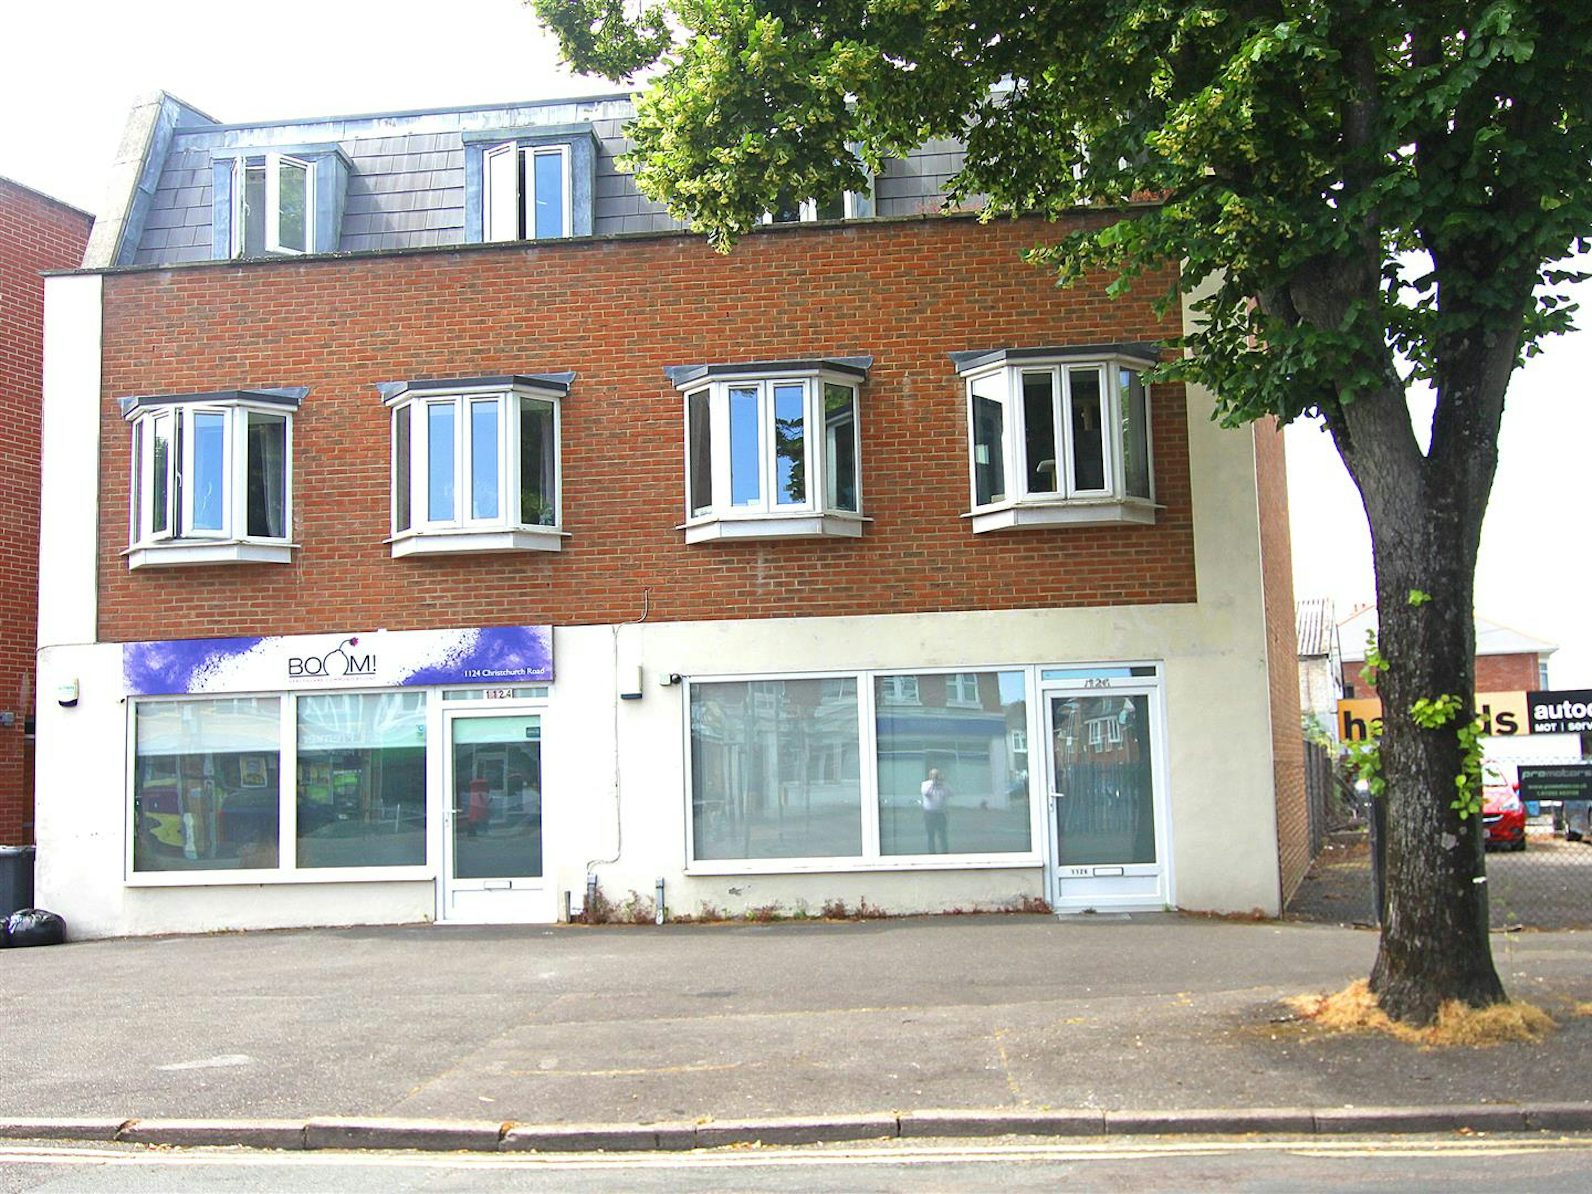 Flat to rent on Christchurch Road Bournemouth, BH7